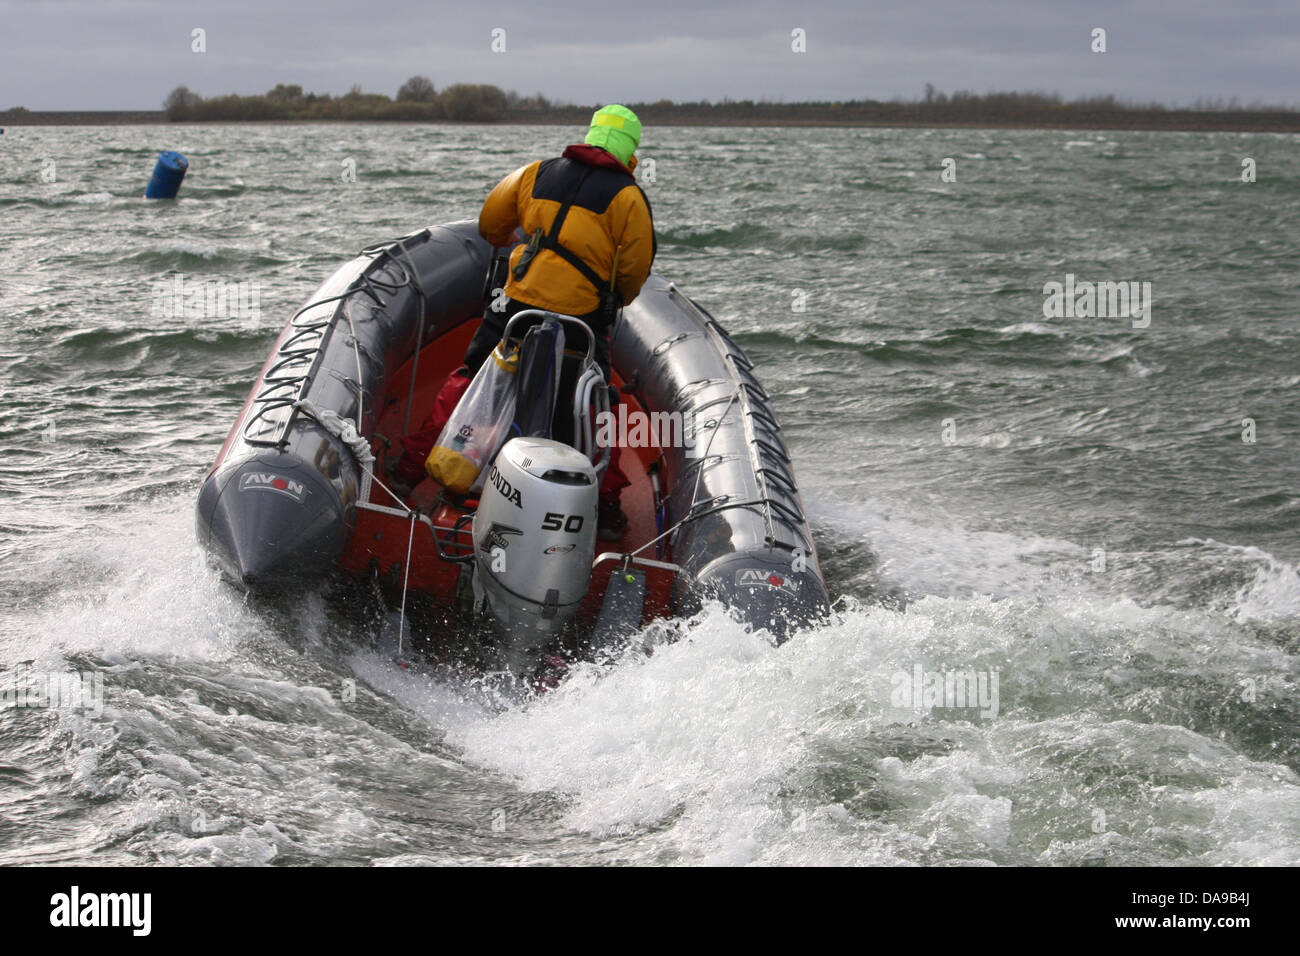 A rigid inflatable boat RIB powering through waves Stock Photo